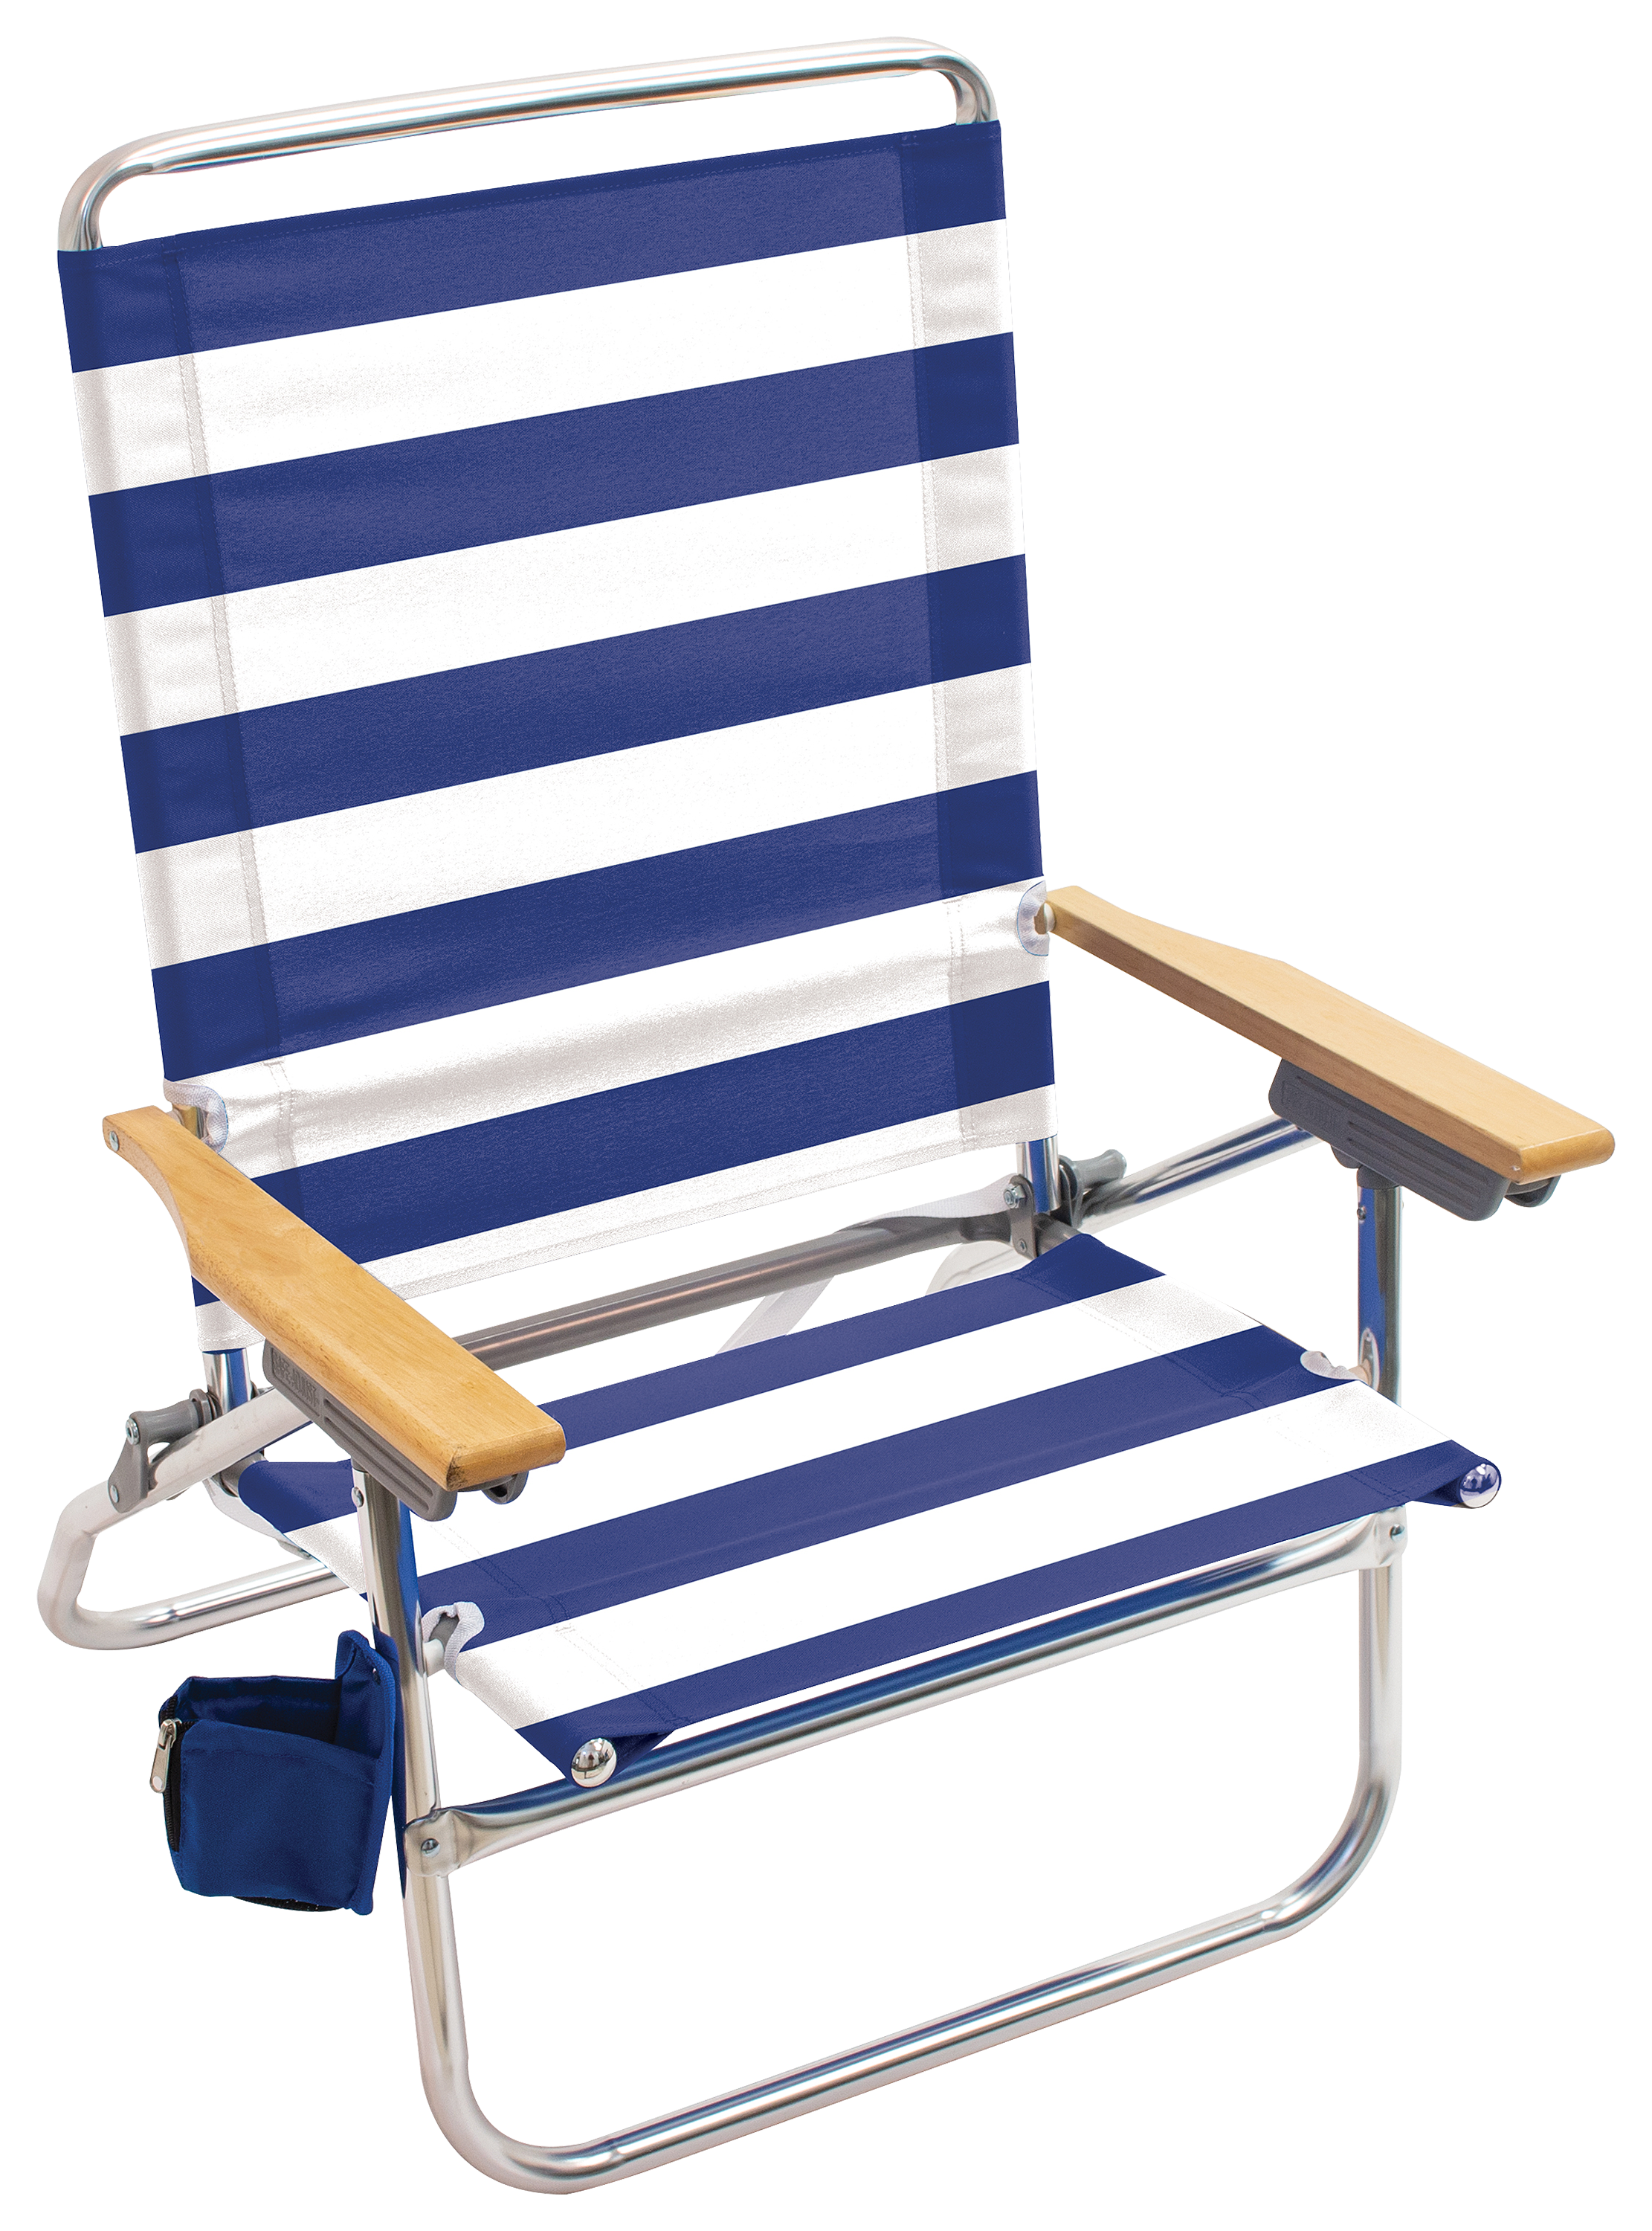 Rio Brands Easy In/Easy Out Tommy Bahama Beach Chair - Aqua